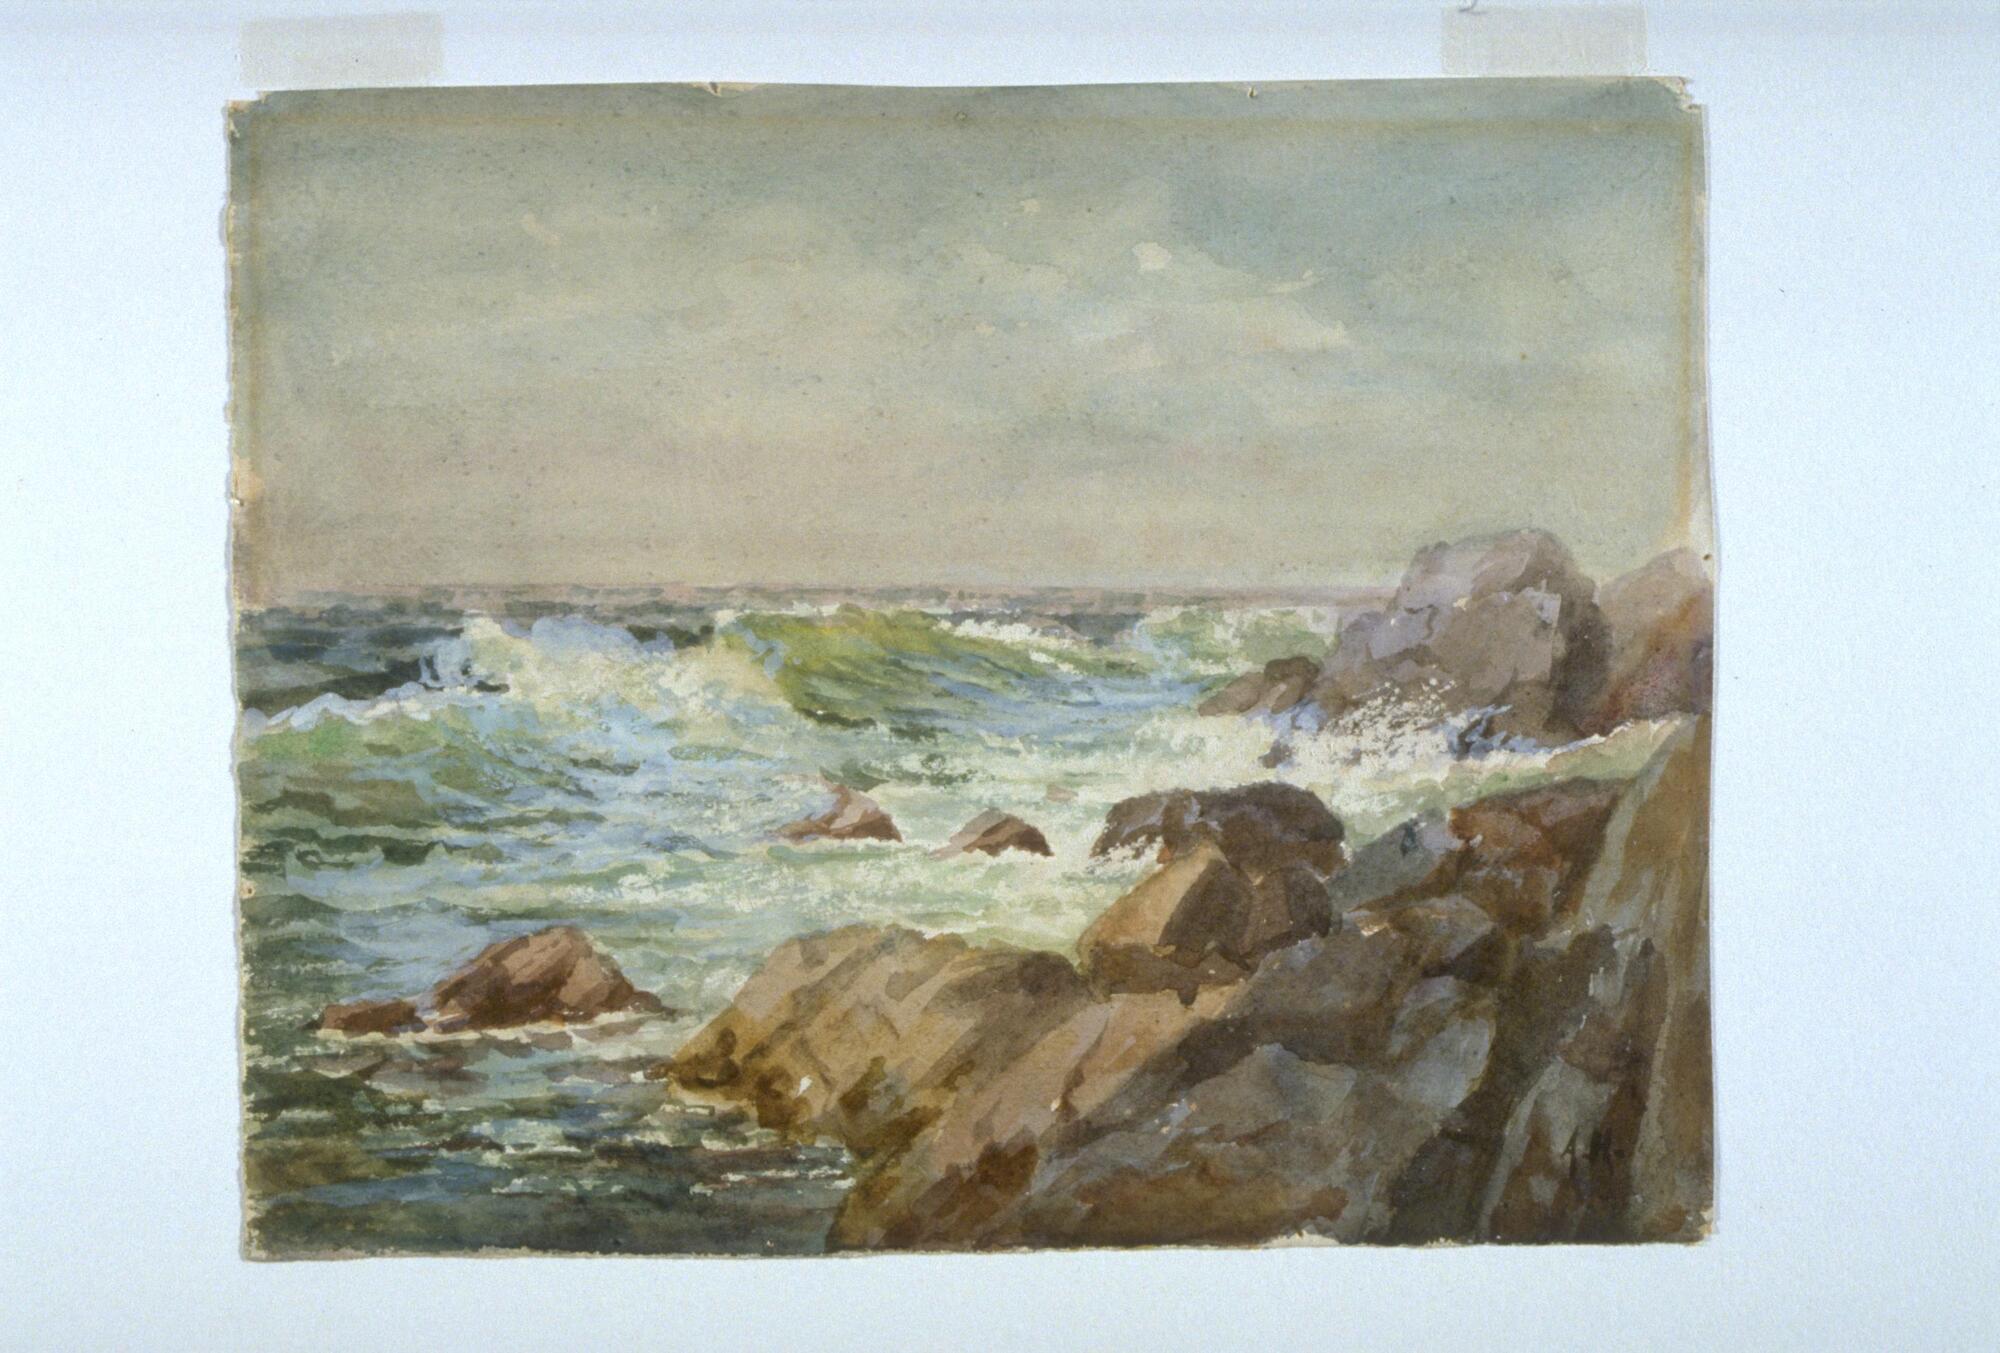 Waves crashing on the rocks which are mostly situated on the right bottom half of the image. The sky is gray and blue while the water is a mix of greens, blues and white.